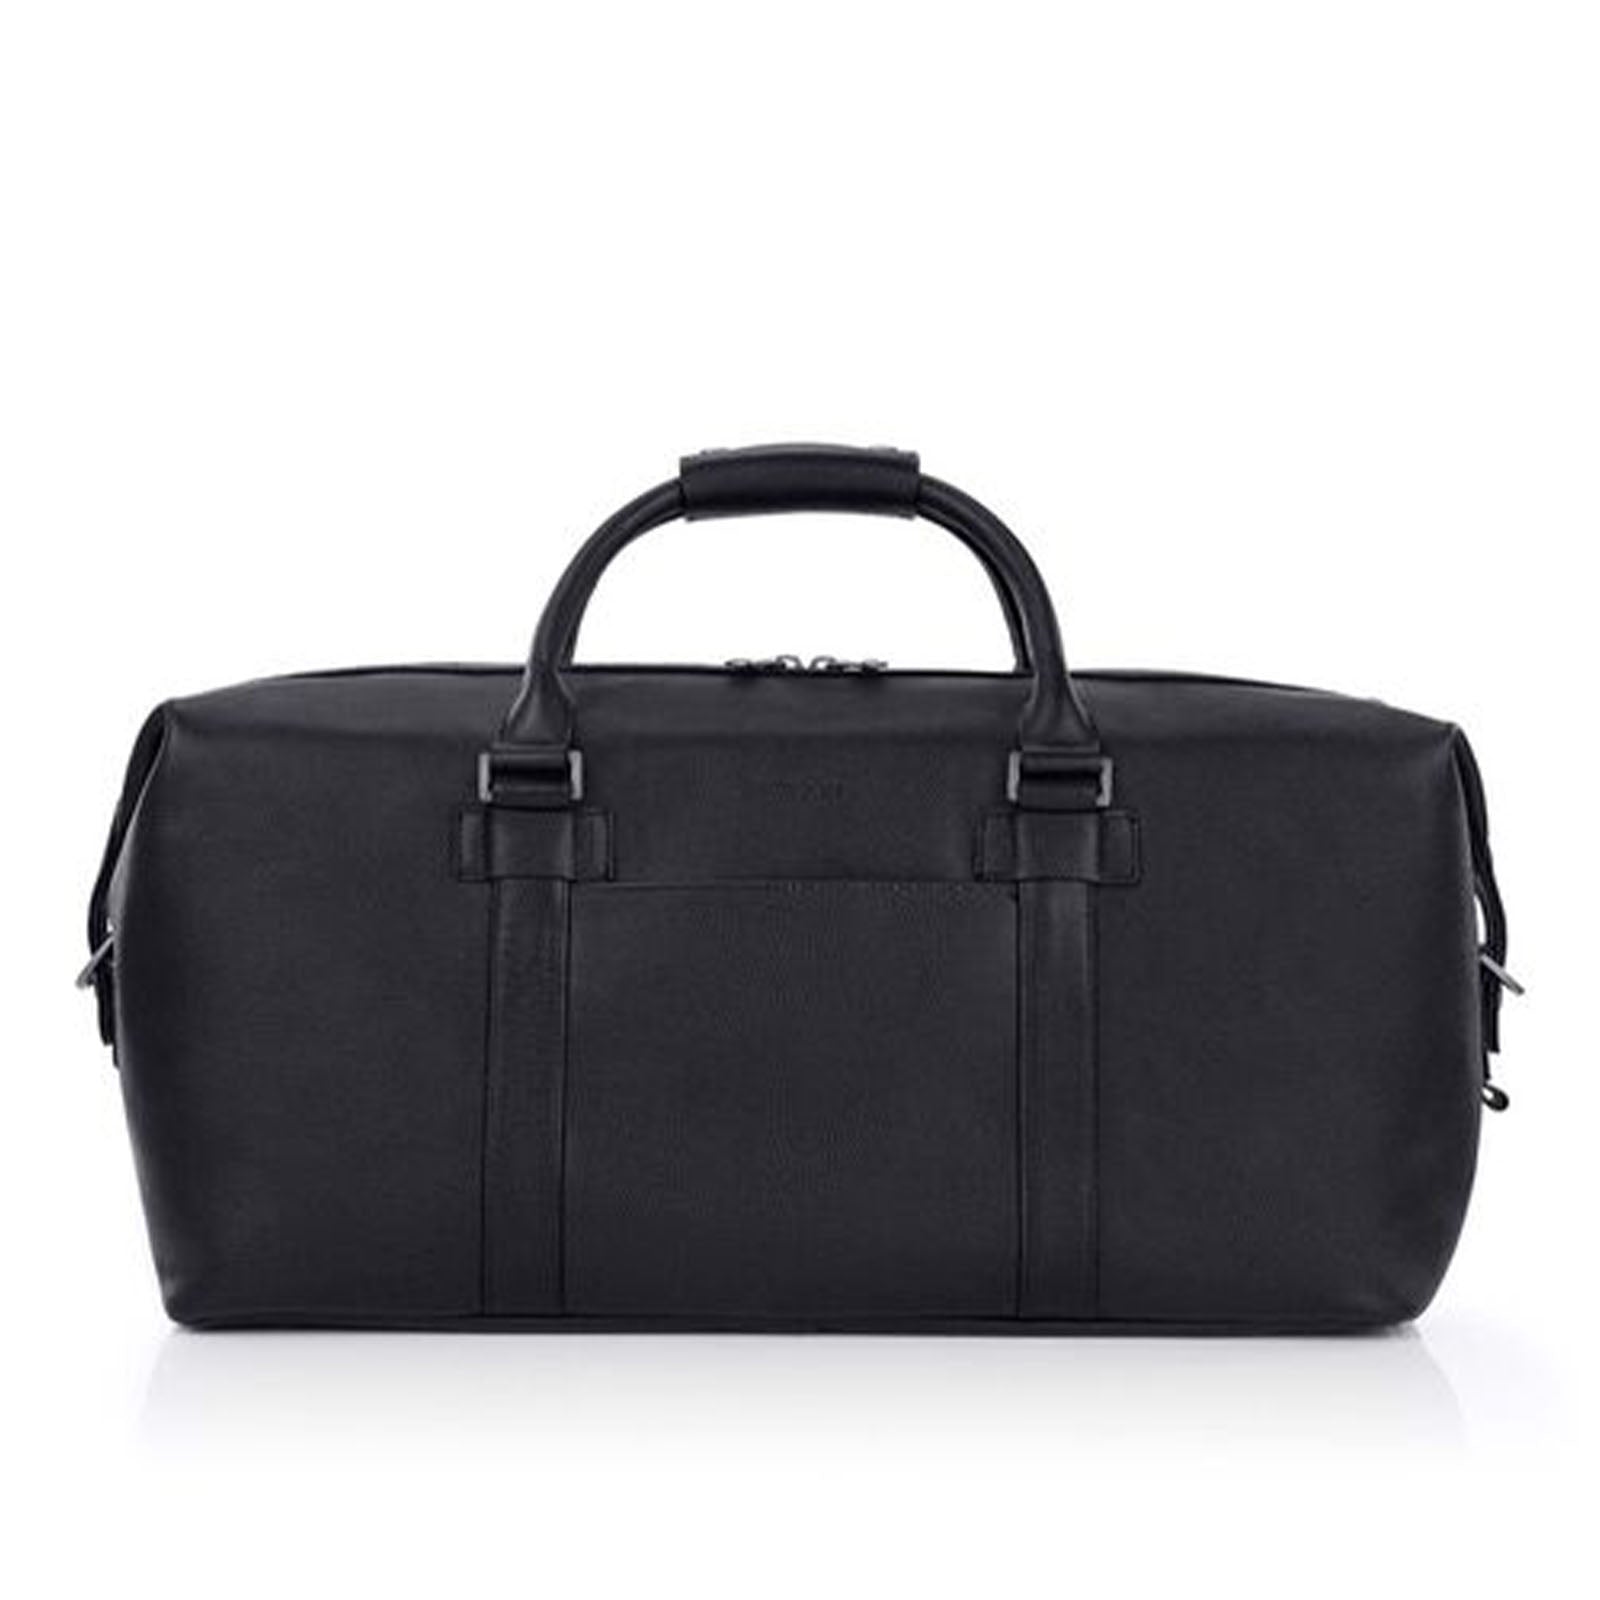 Samsonite-Classic-Leather-Carry-On-Duffle-Black-Front